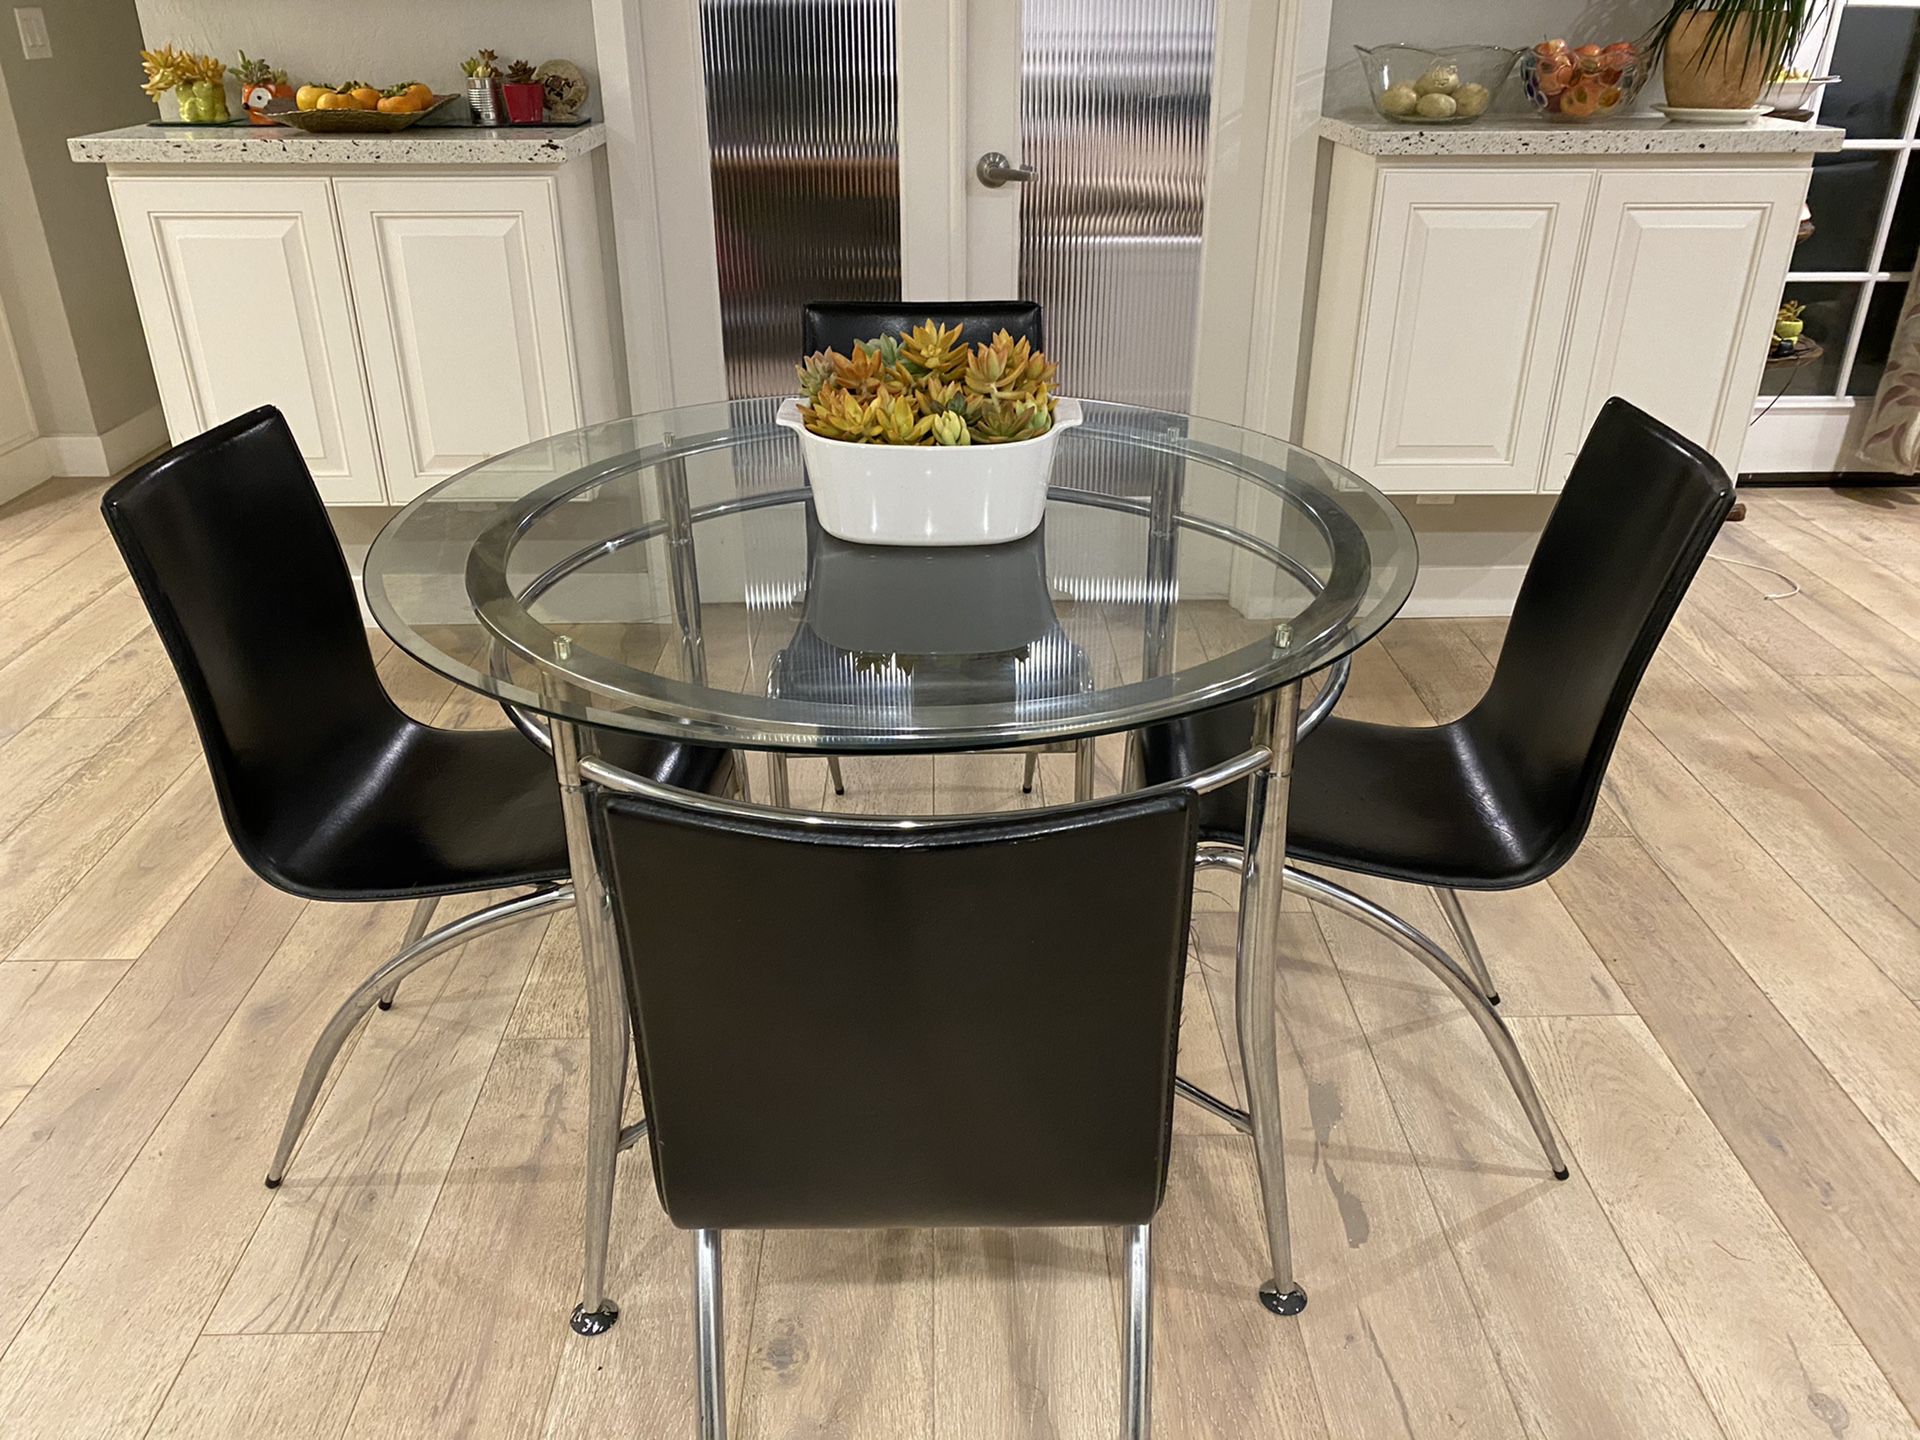 Modern Glass And Metal Mesa Dinner Dining table Dinette Set with 4 black sillas chairs